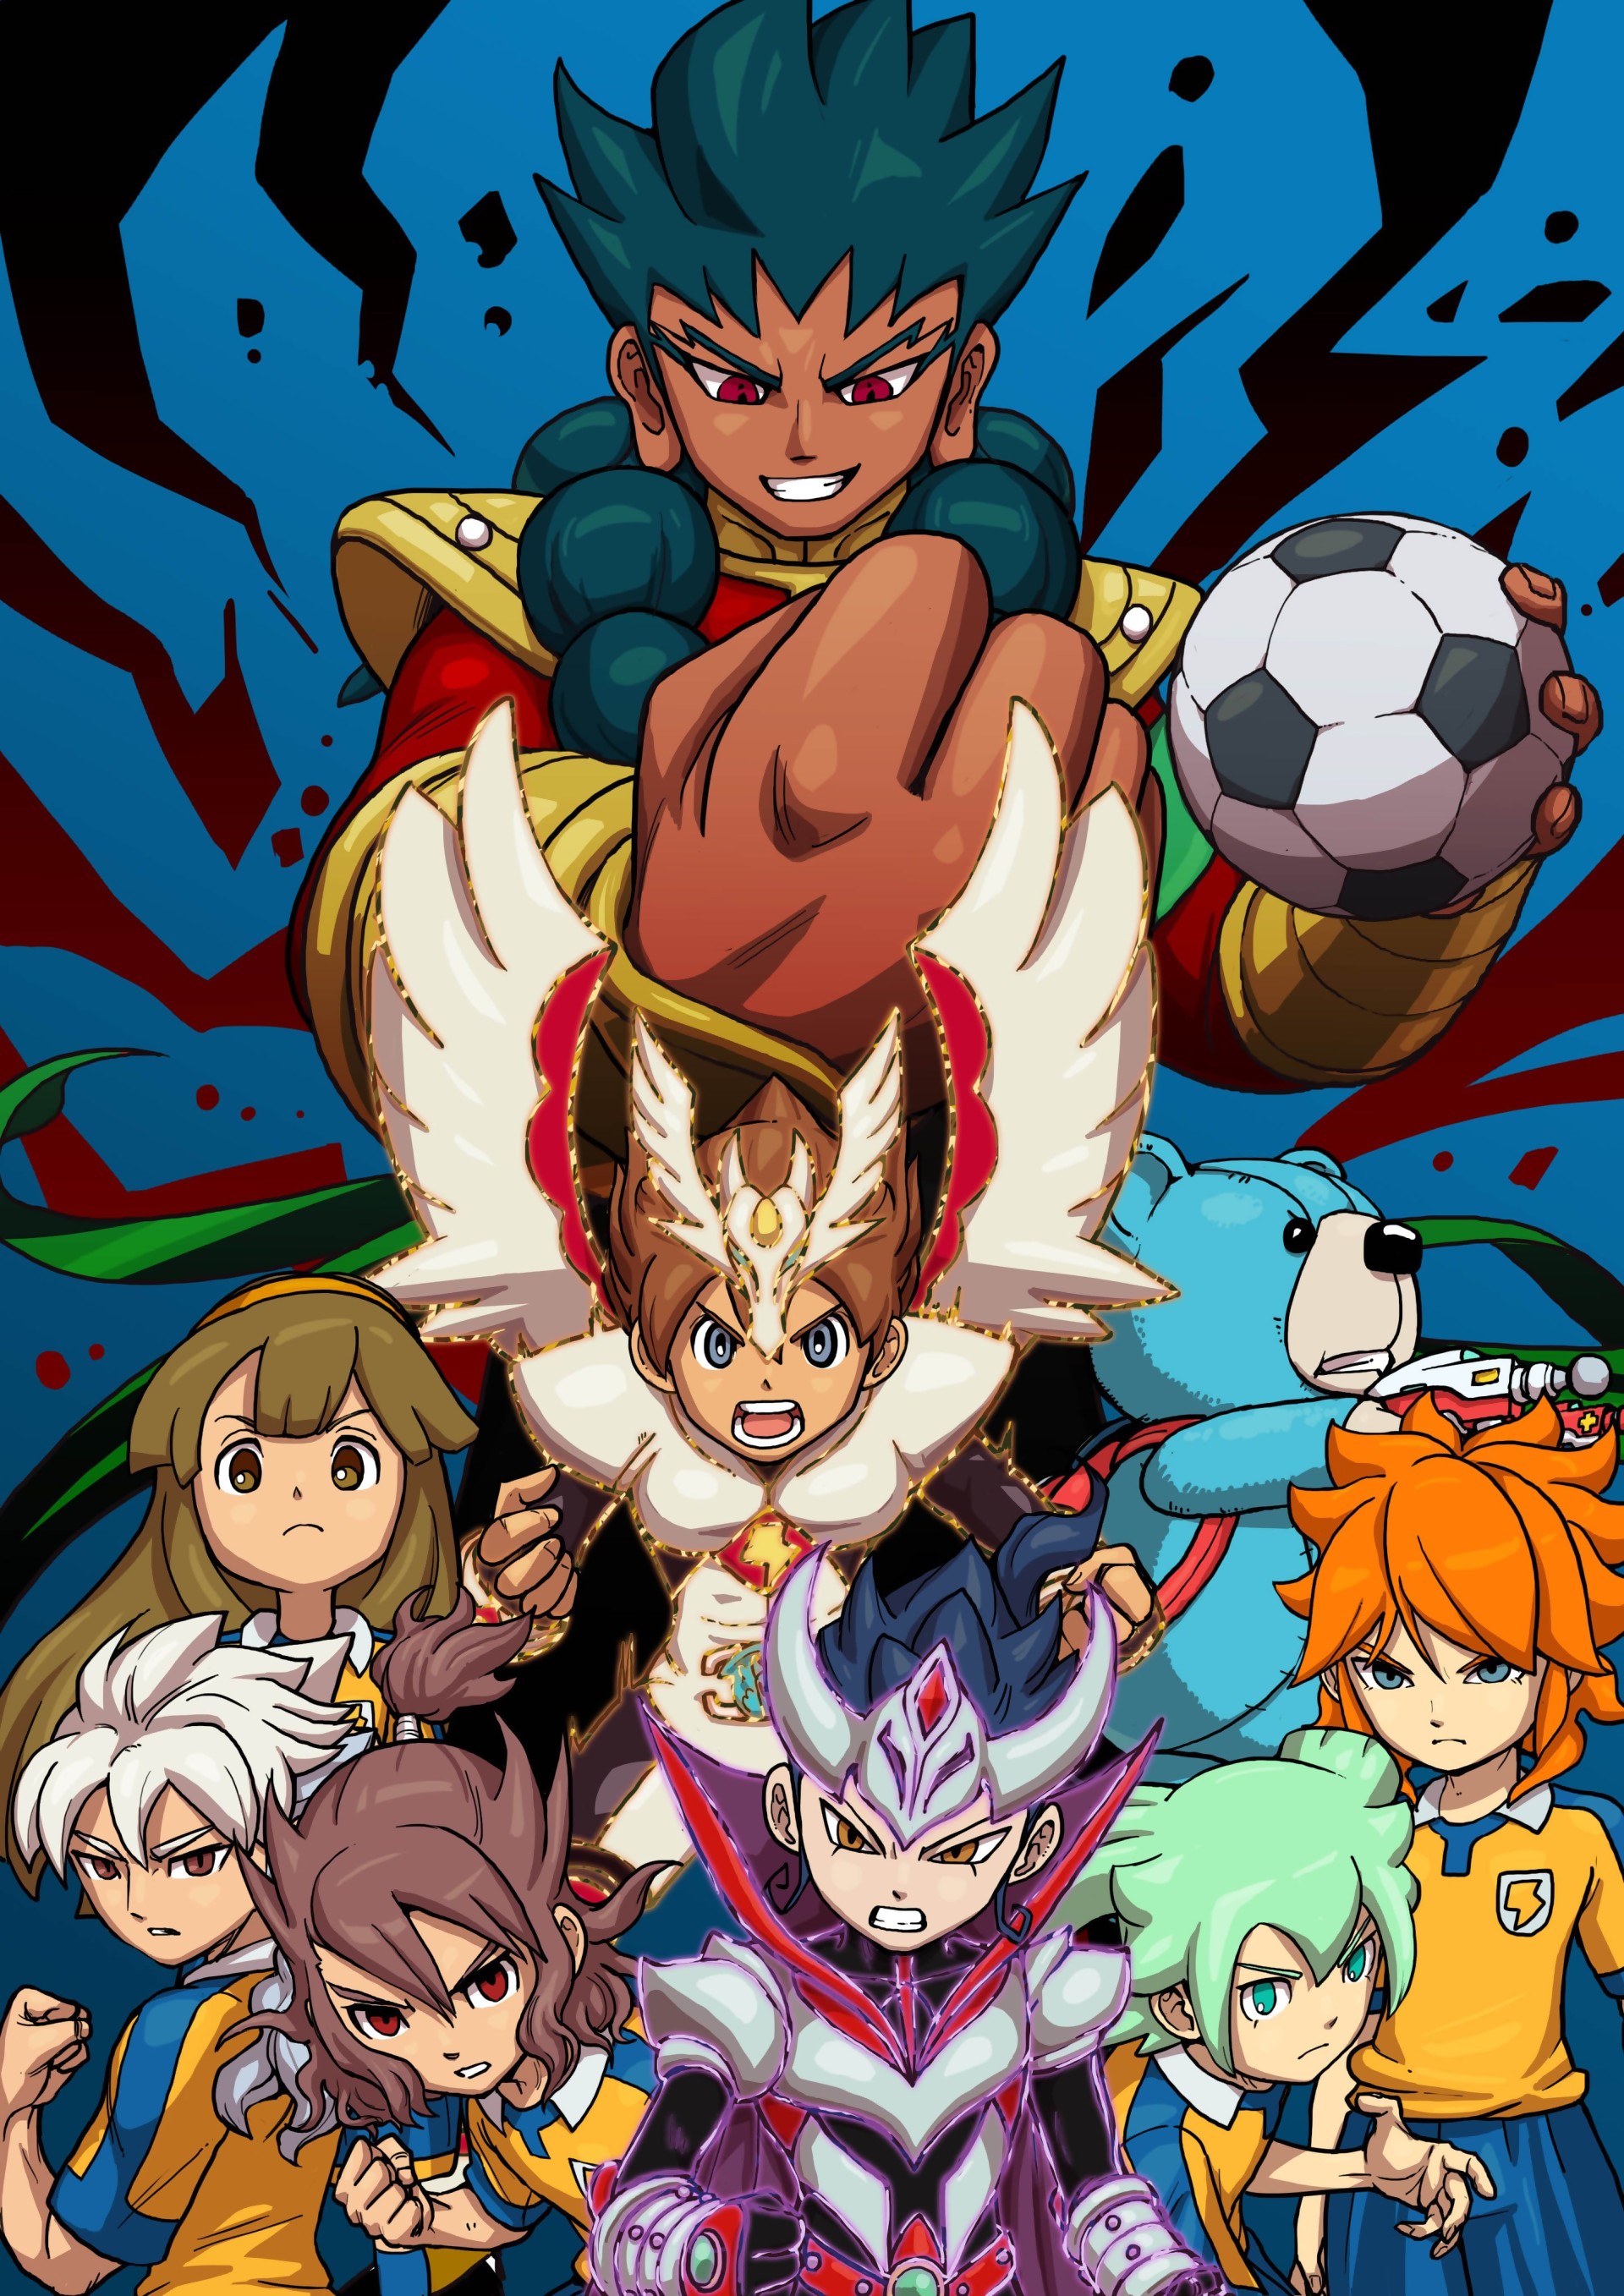 inazuma eleven go game download for android mobile ppsspp